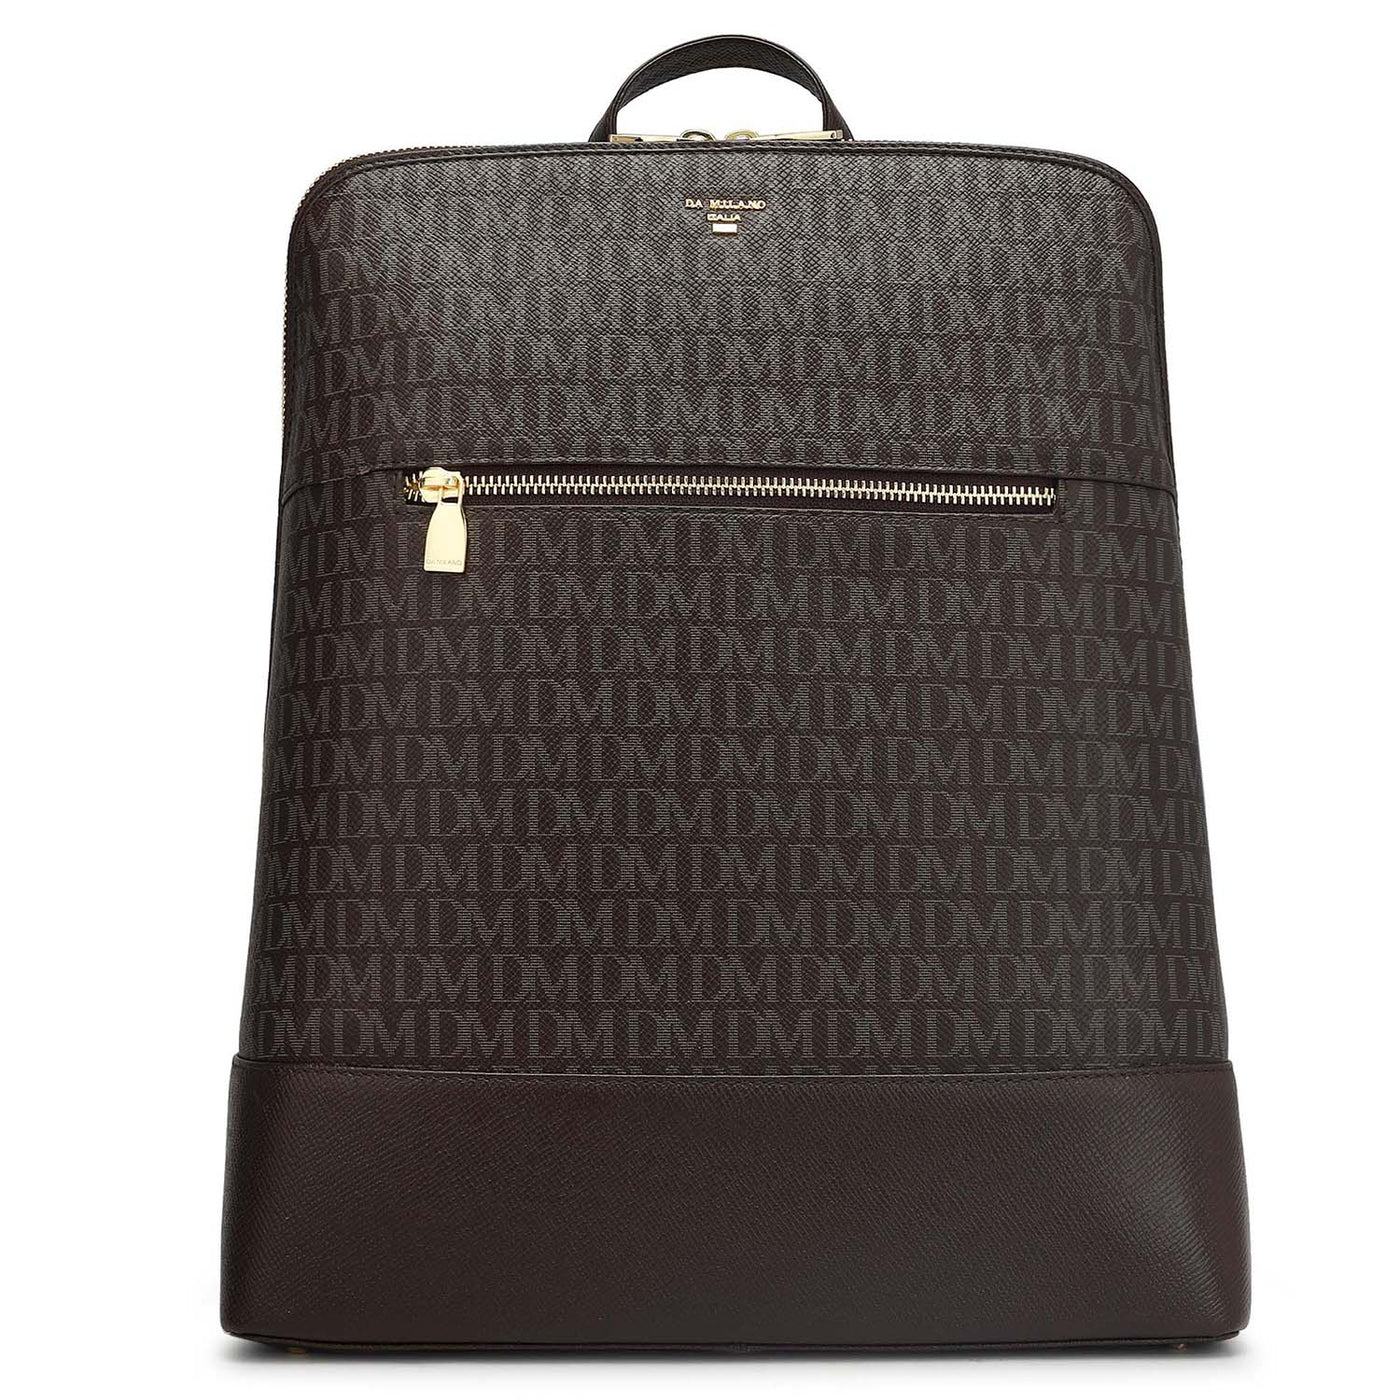 Monogram Franzy Leather Backpack - Chocolate